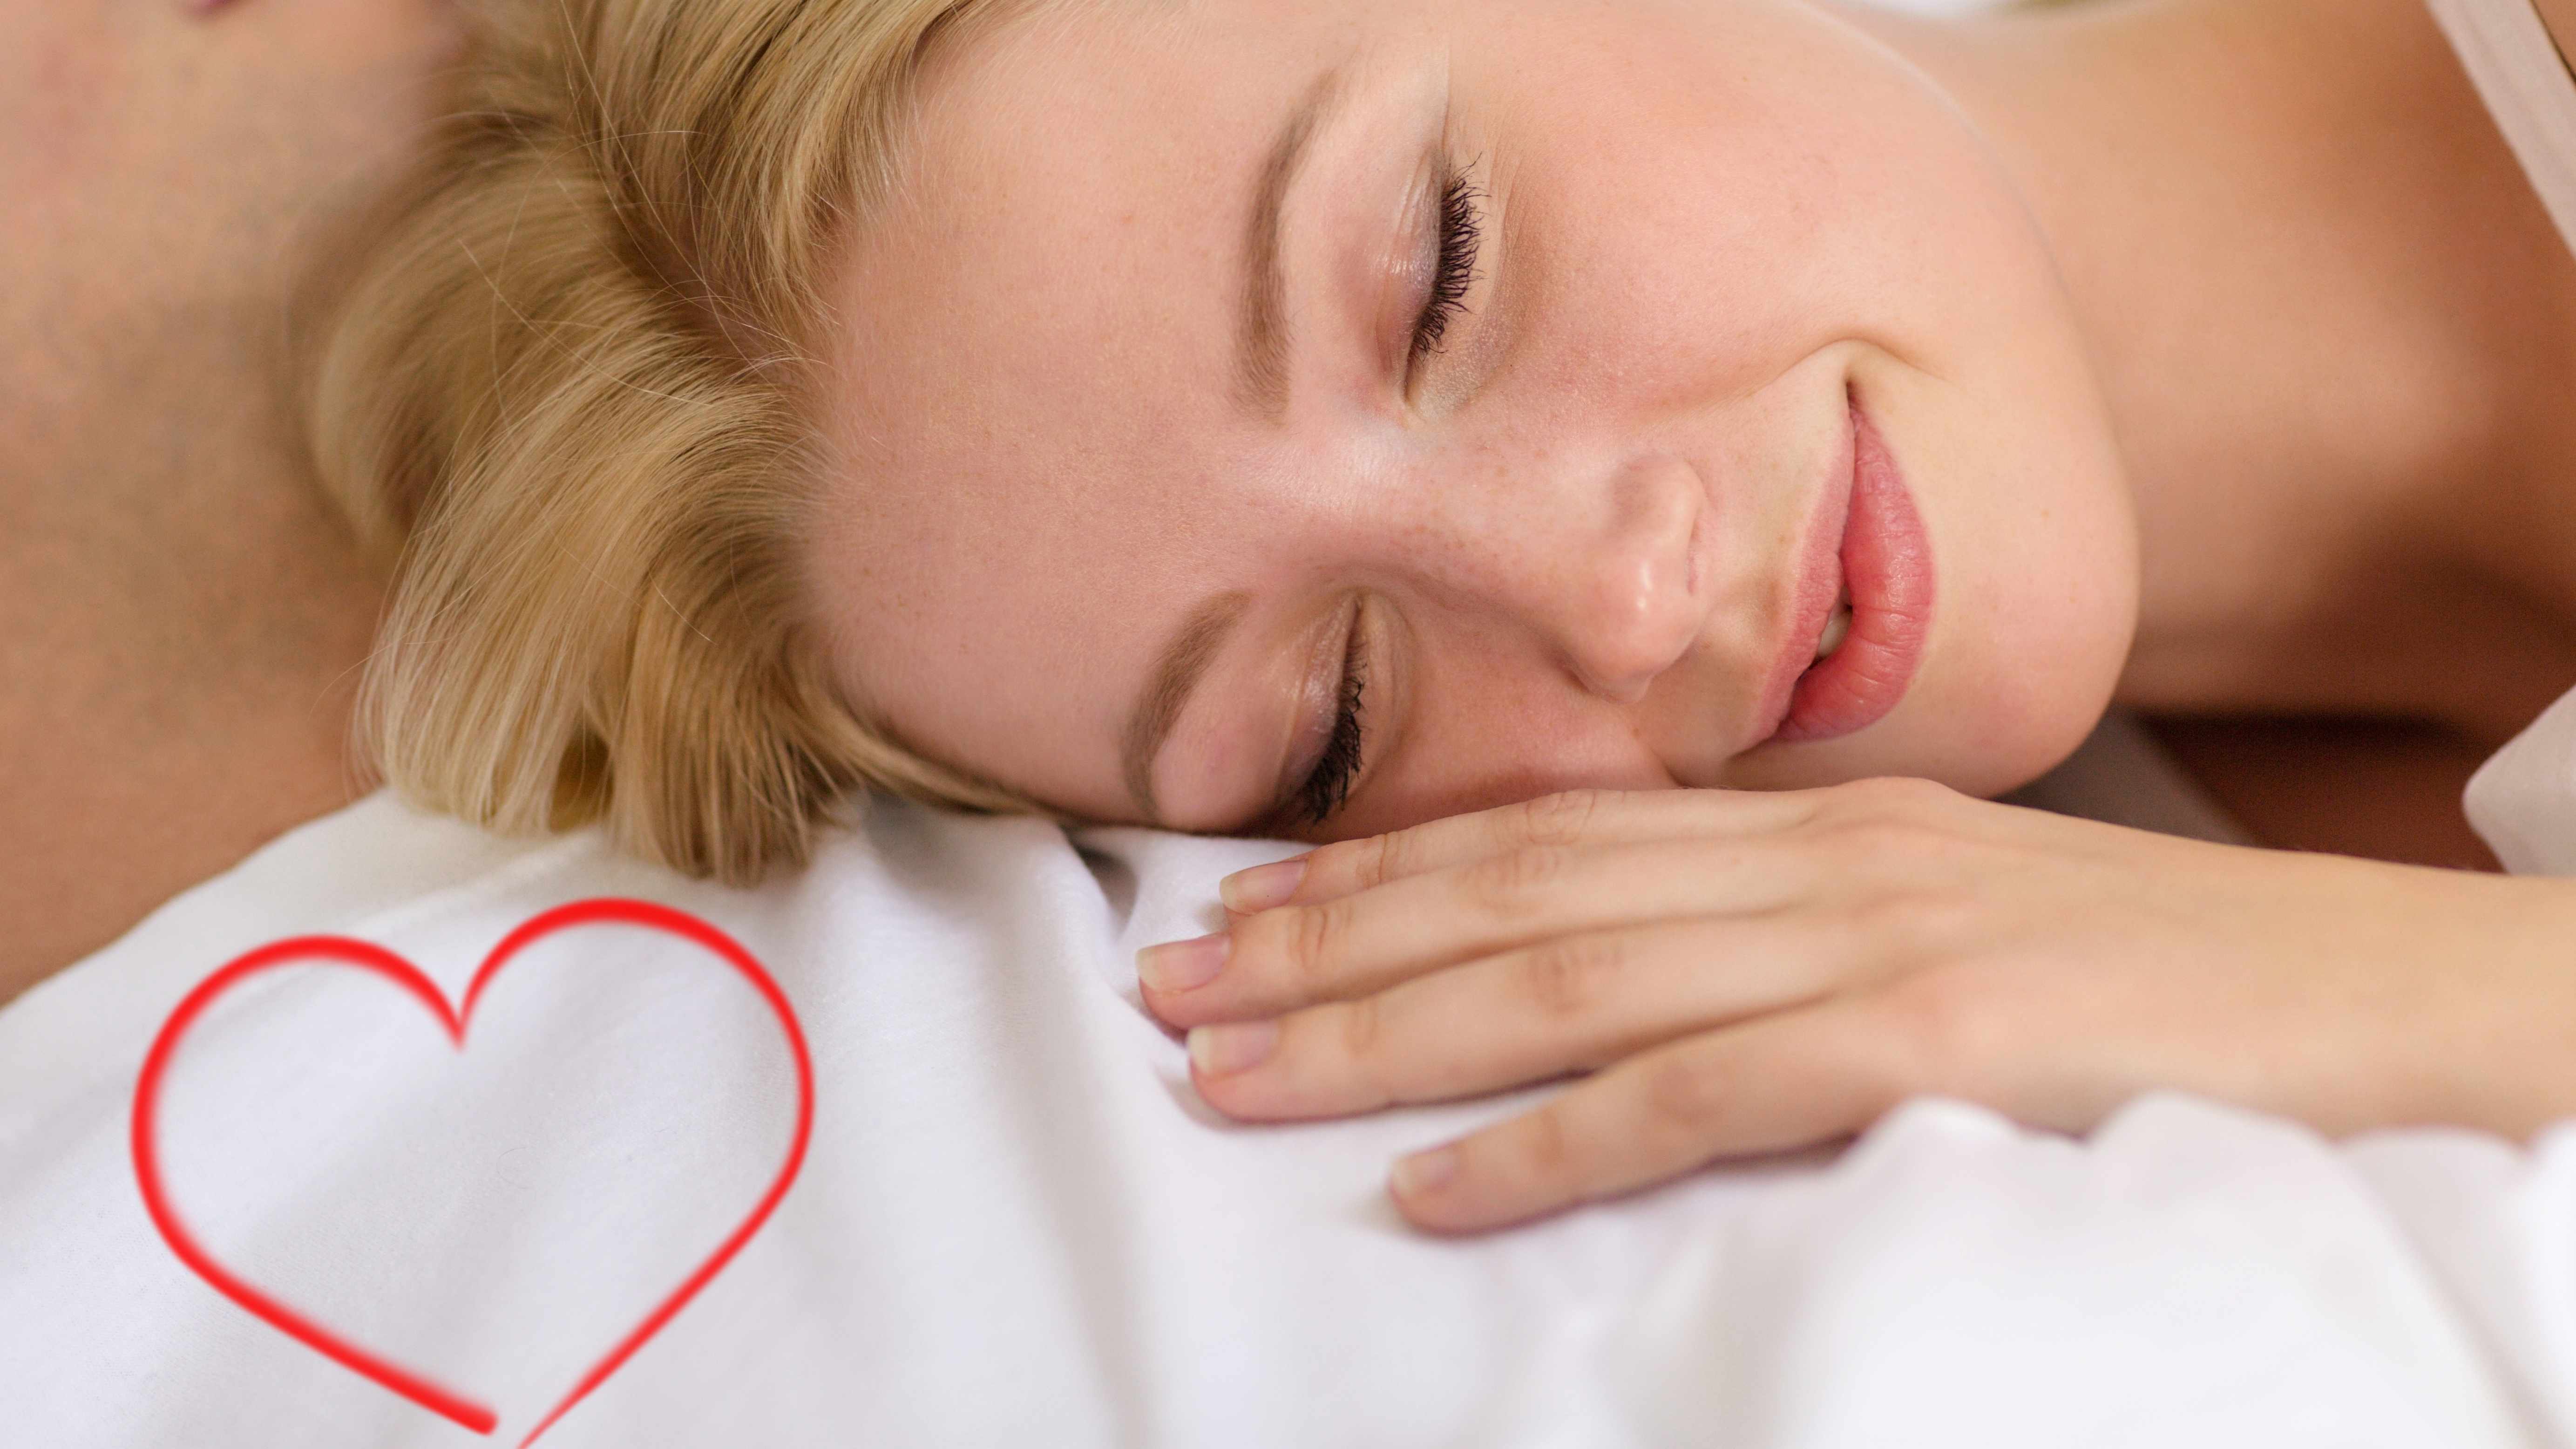 woman sleeping peacefully, loving sleep with a heart drawn in the corner